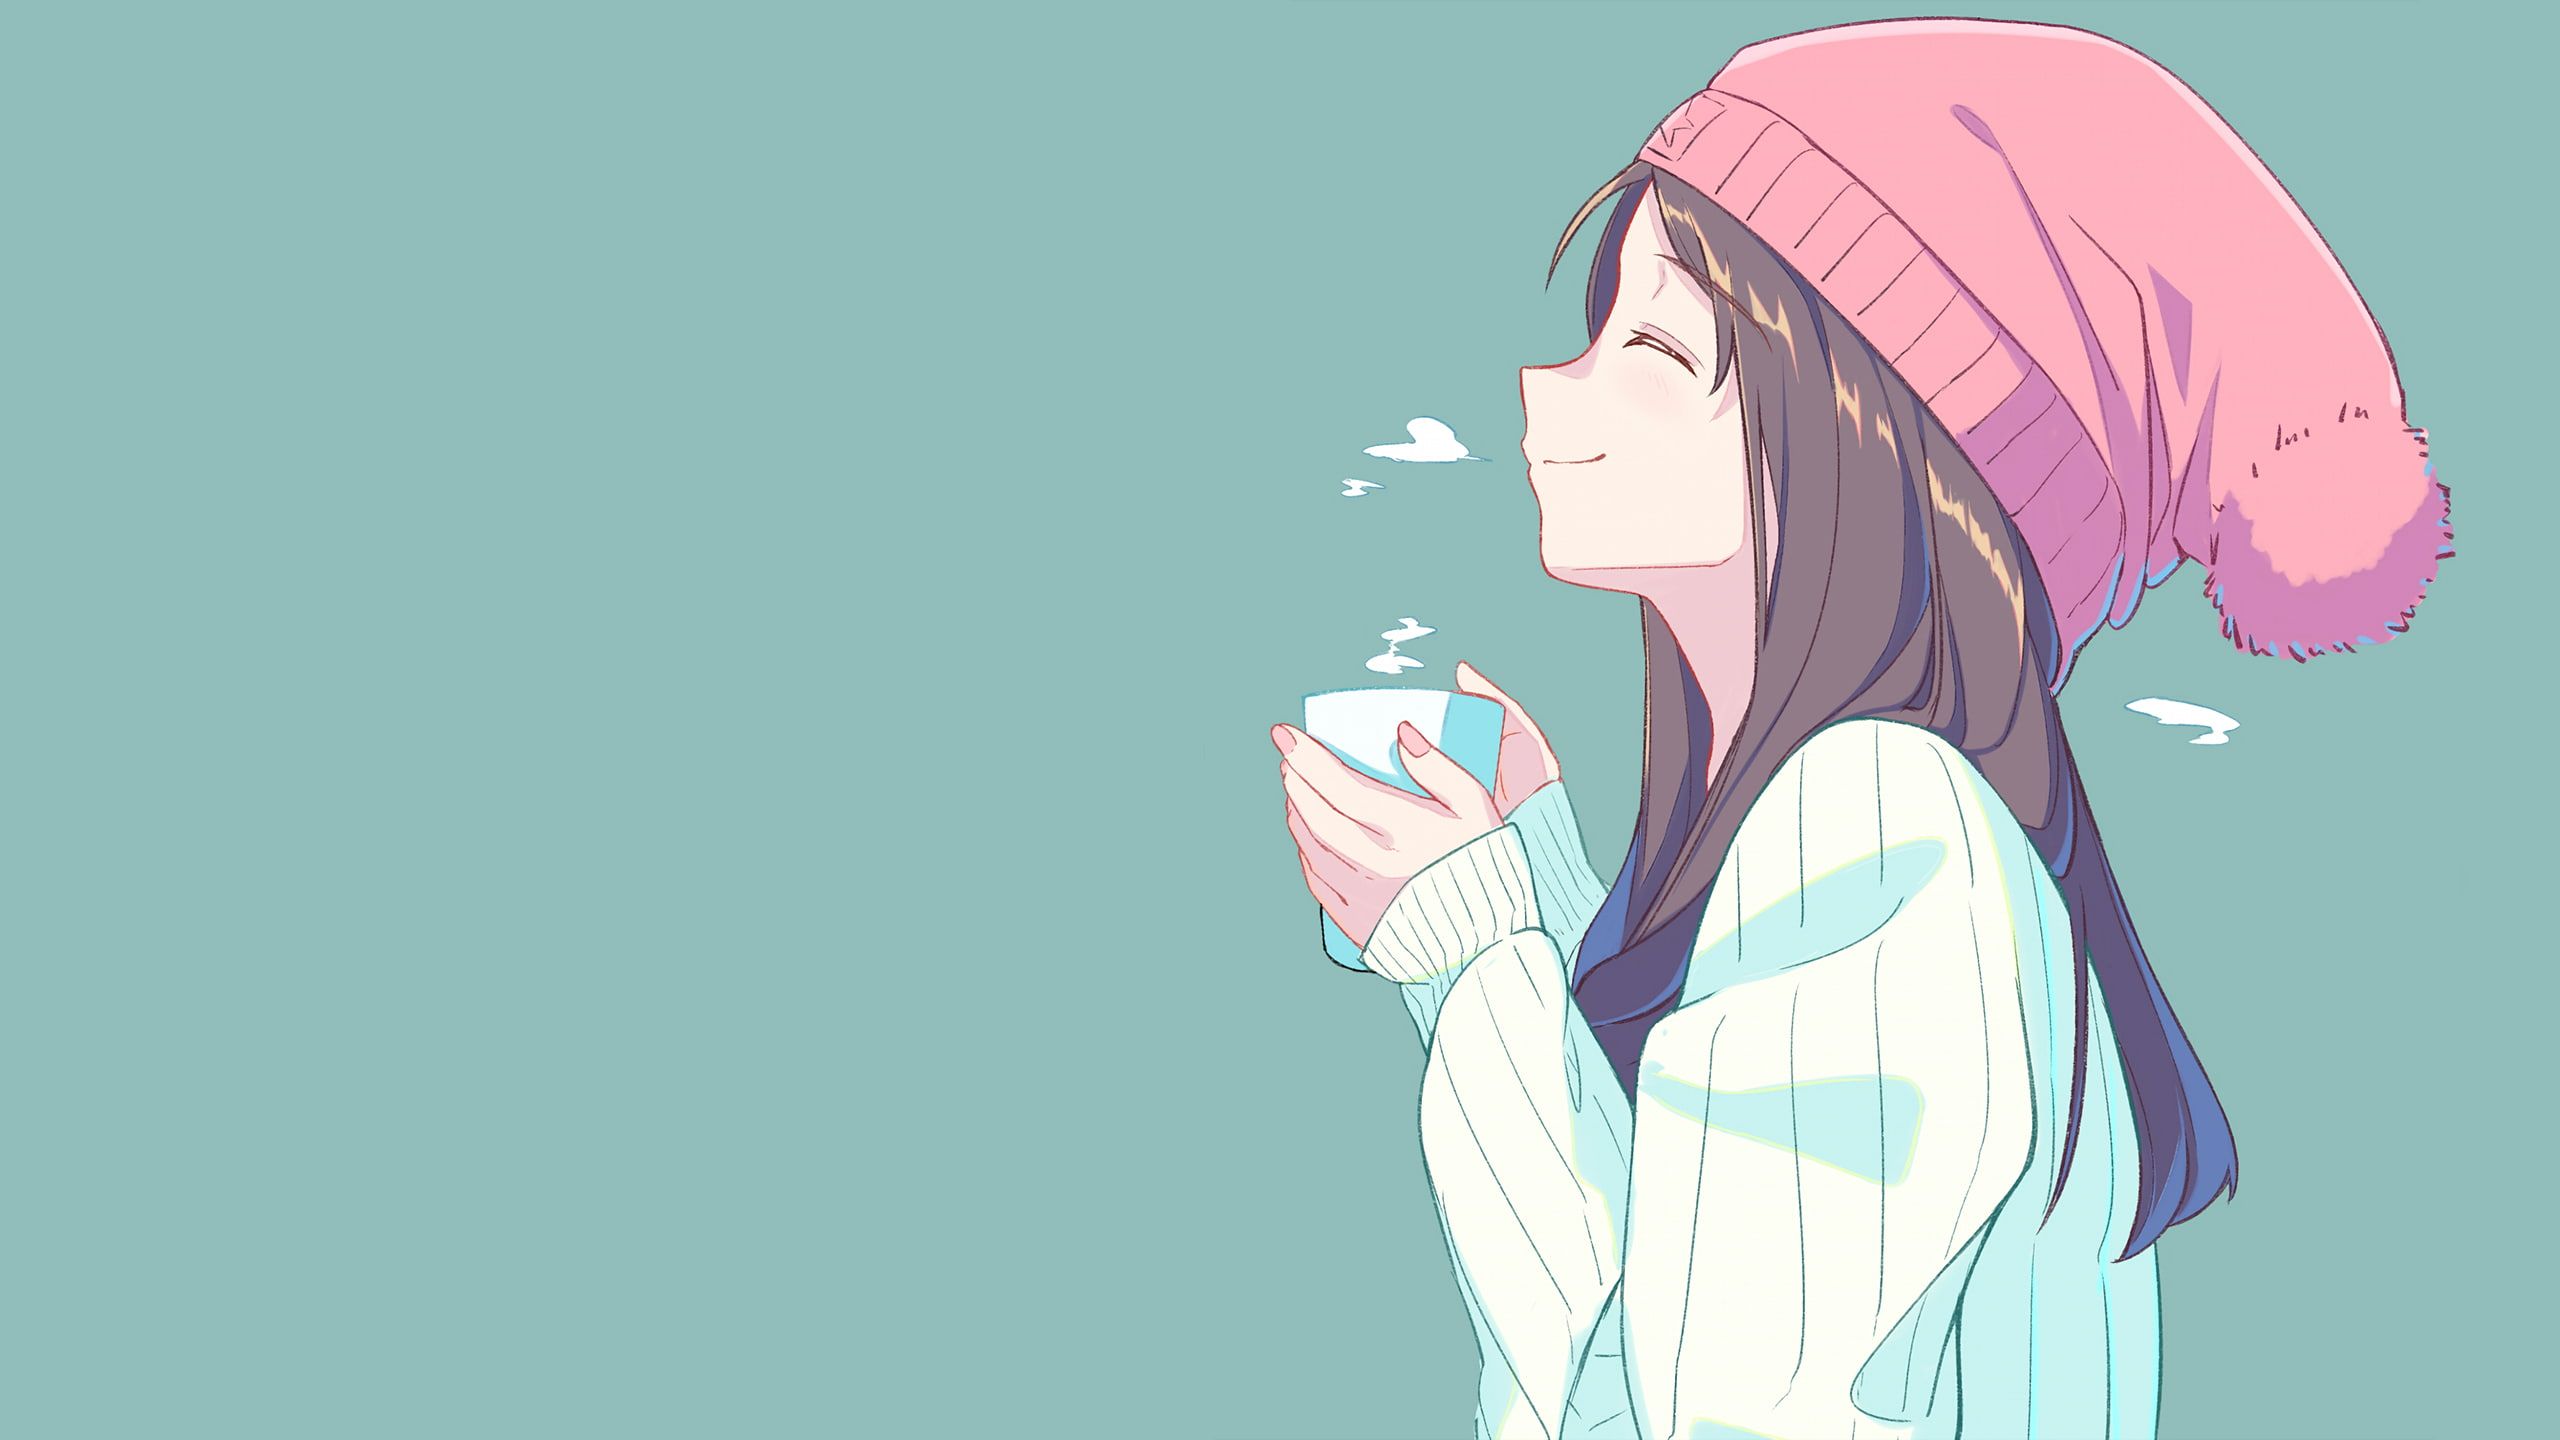 Anime girl in pink hat holding a cup of hot chocolate - Anime girl